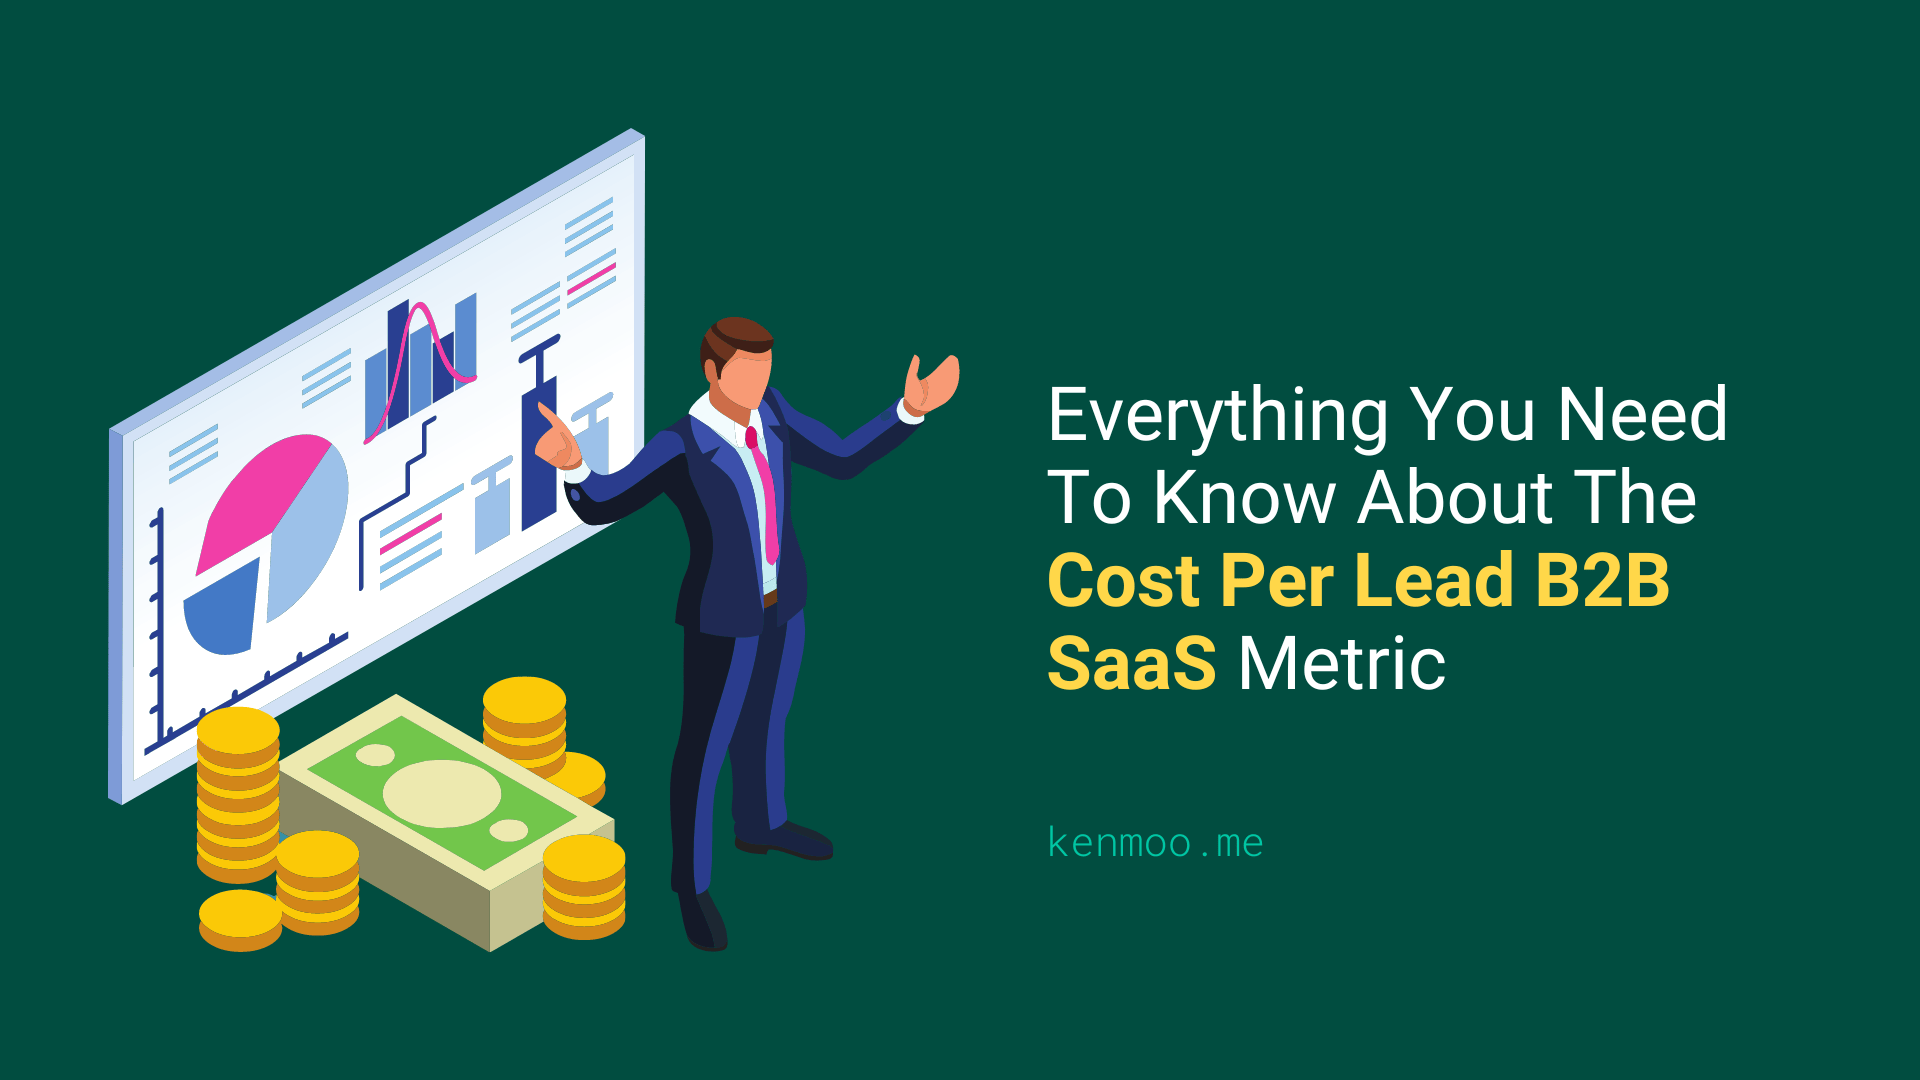 Everything You Need To Know About The Cost Per Lead B2B SaaS Metric